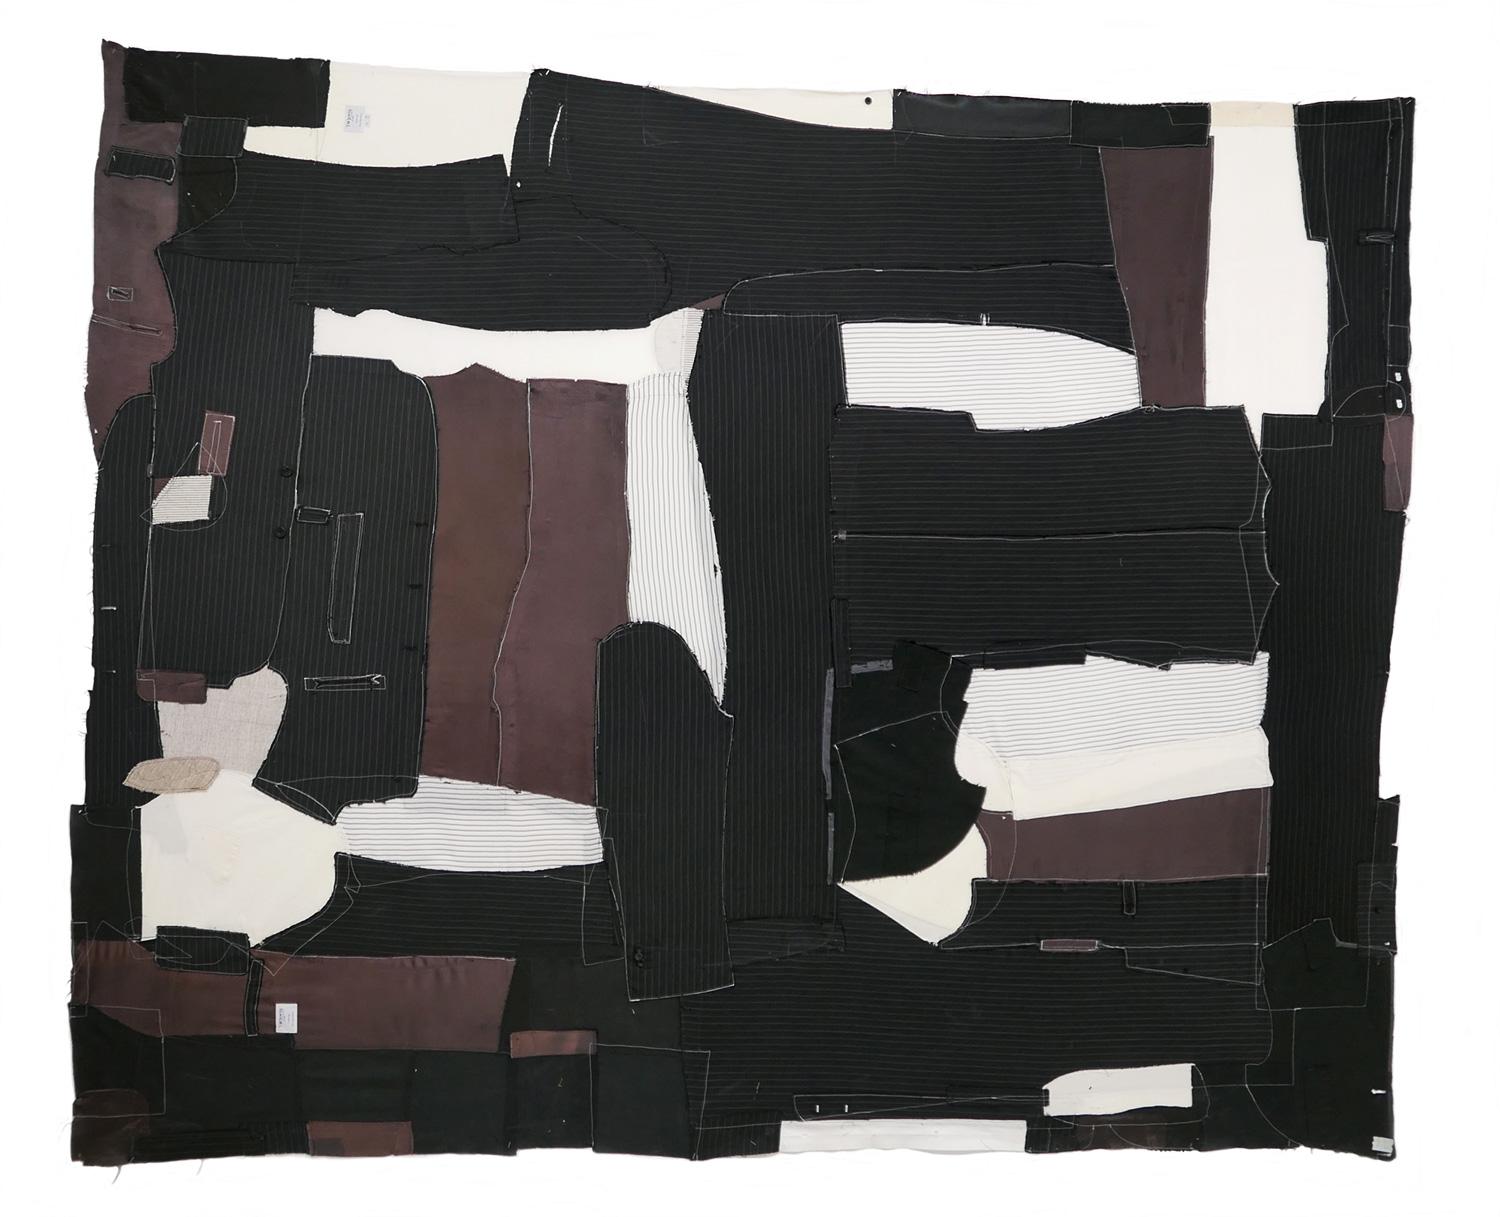 Maria Lilja, Cutting Up 6 kritstreck, 2019, 200 x 215 cm. Sold to Västerås City to be placed in a high school of economics.